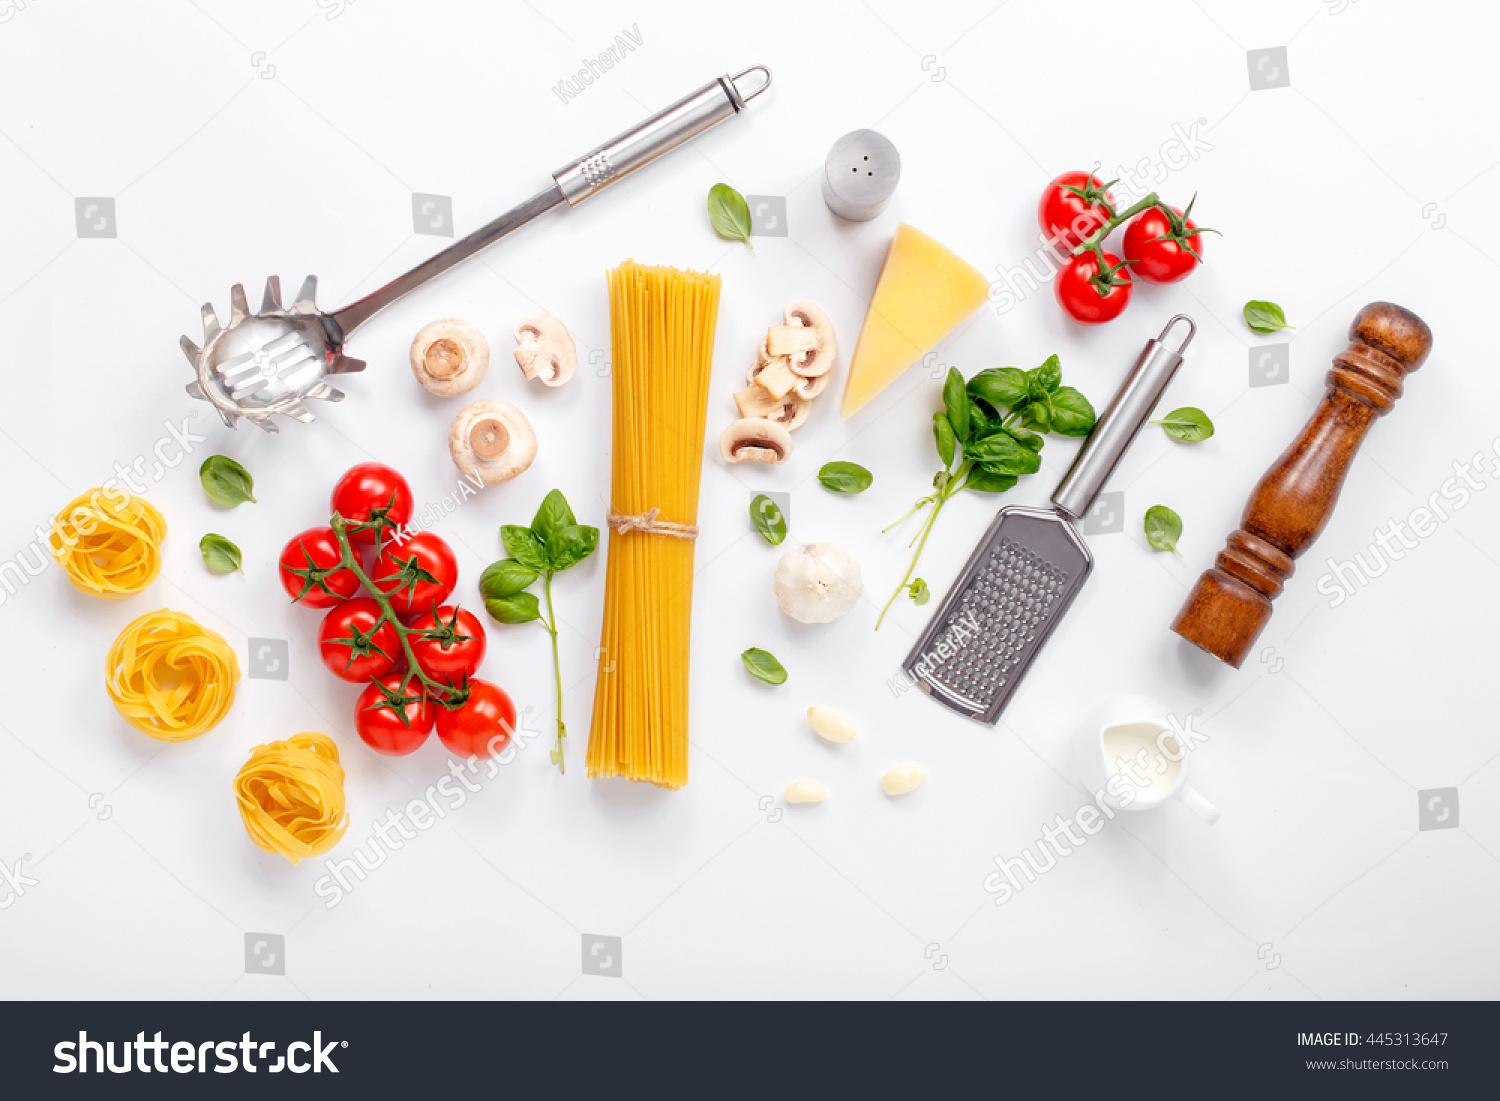 Fettuccine and spaghetti with ingredients for cooking pasta on a white background, top view. Flat lay #445313647